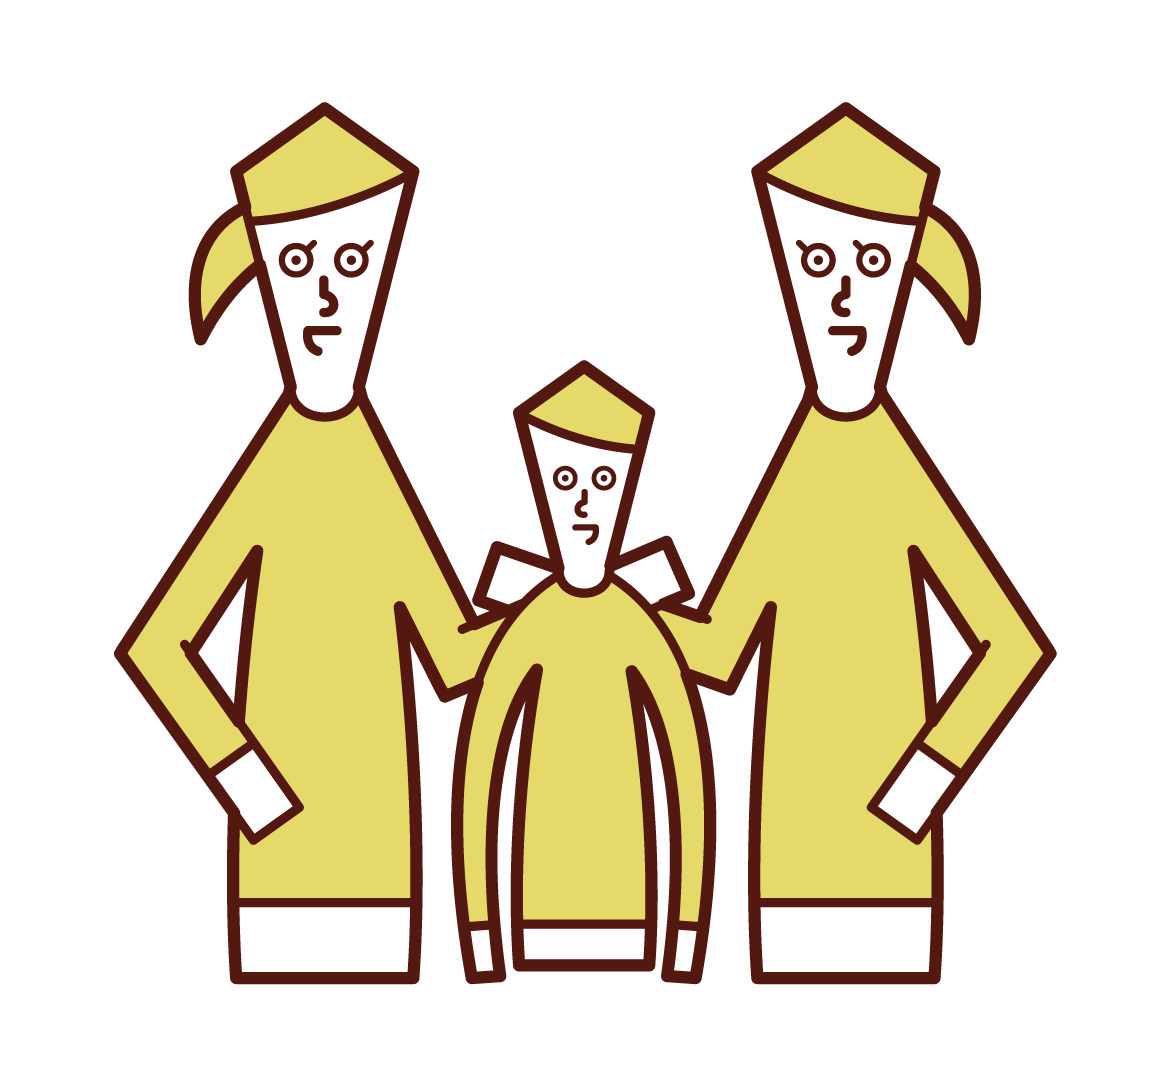 Illustration of same-sex couple (female) adopted